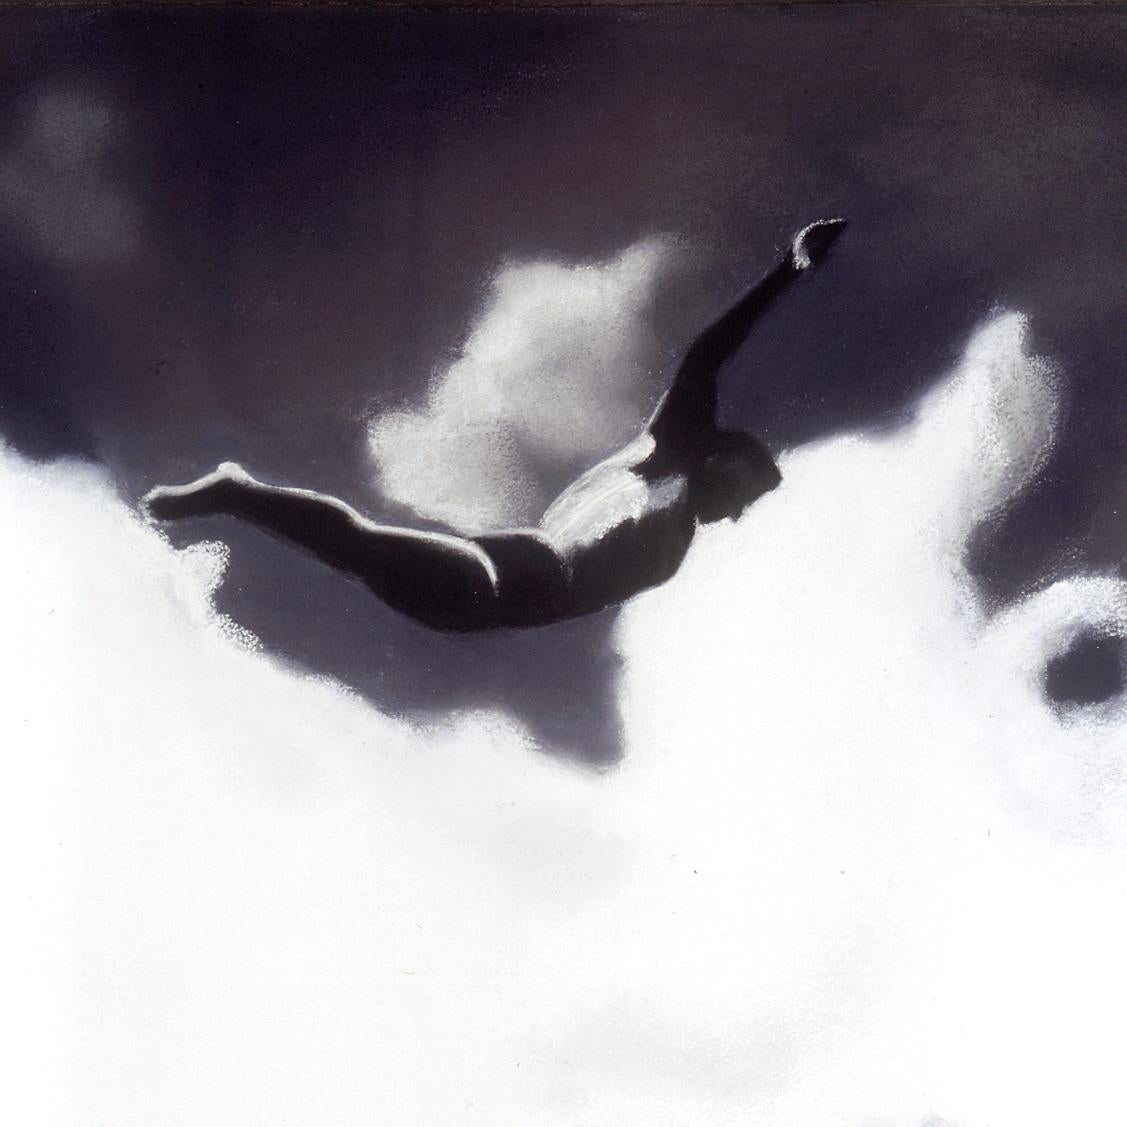 At the center of this large-scale black and white charcoal and pastel painting, a diver launches himself from untold heights, frozen at the peak of action against an ecstatic plume of clouds. Zalopany excels at painting with light, often abstracting